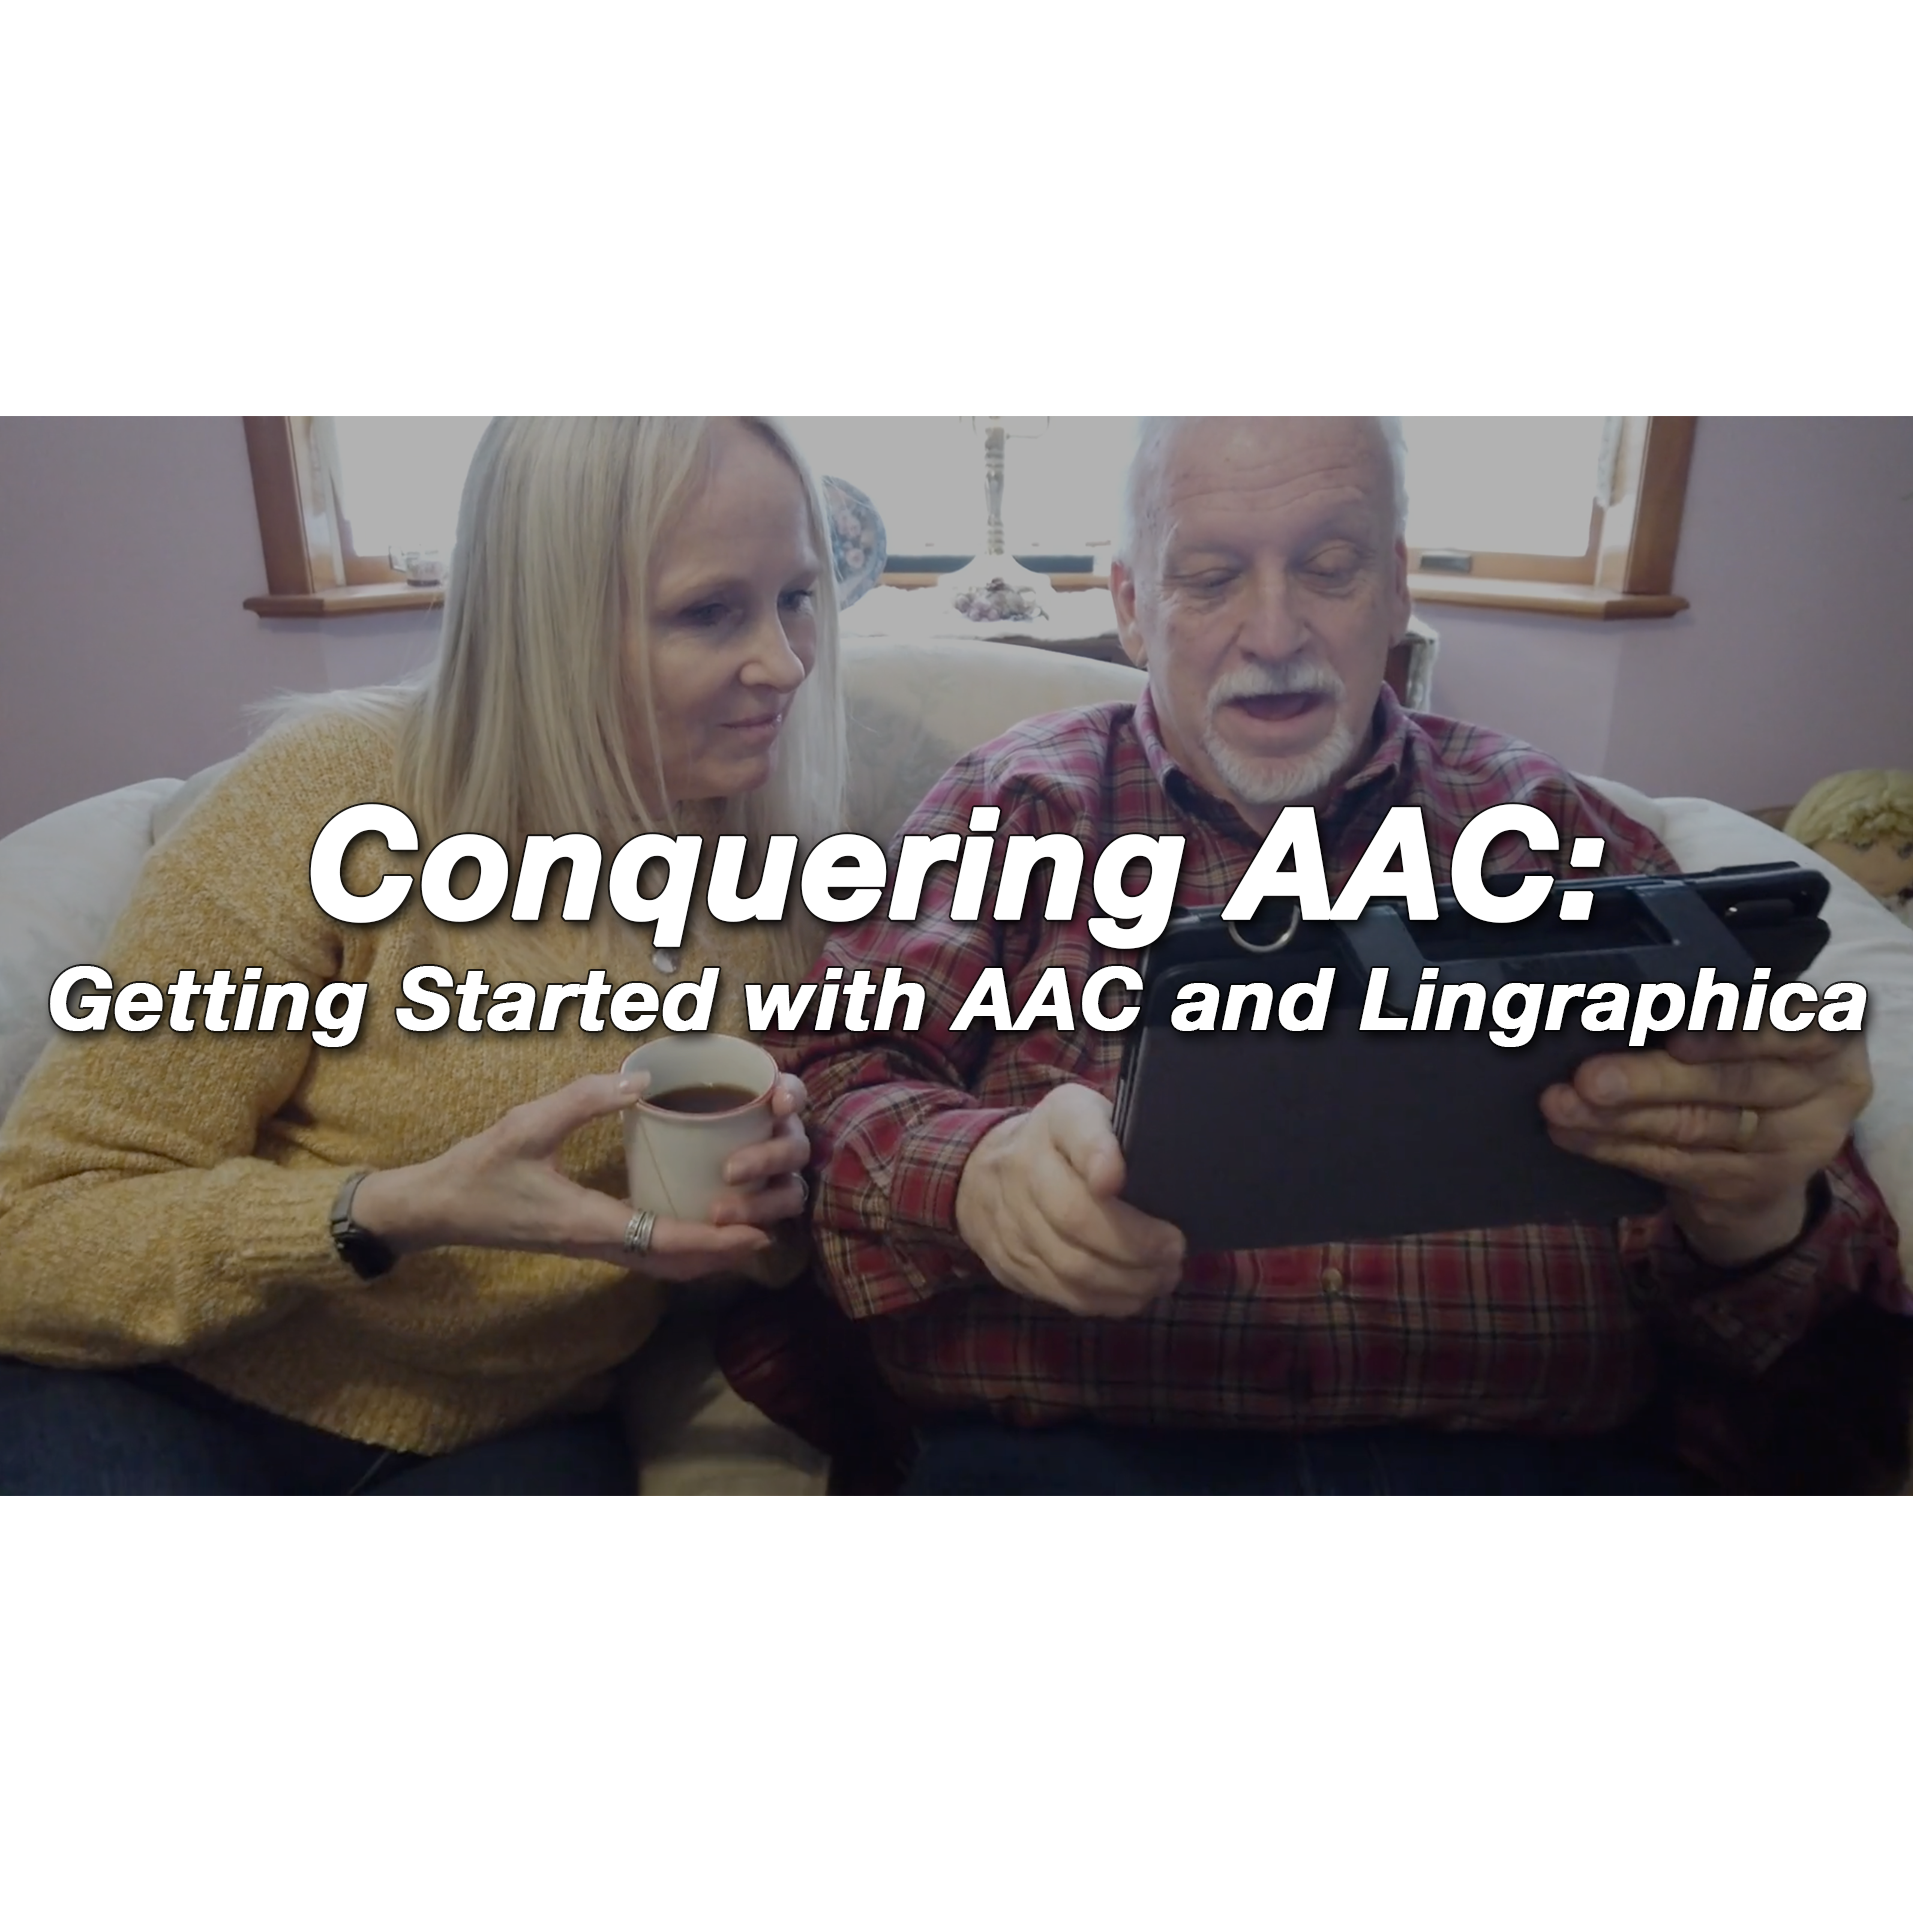 Conquering AAC: Getting Started with AAC and Lingraphica (Course 1)